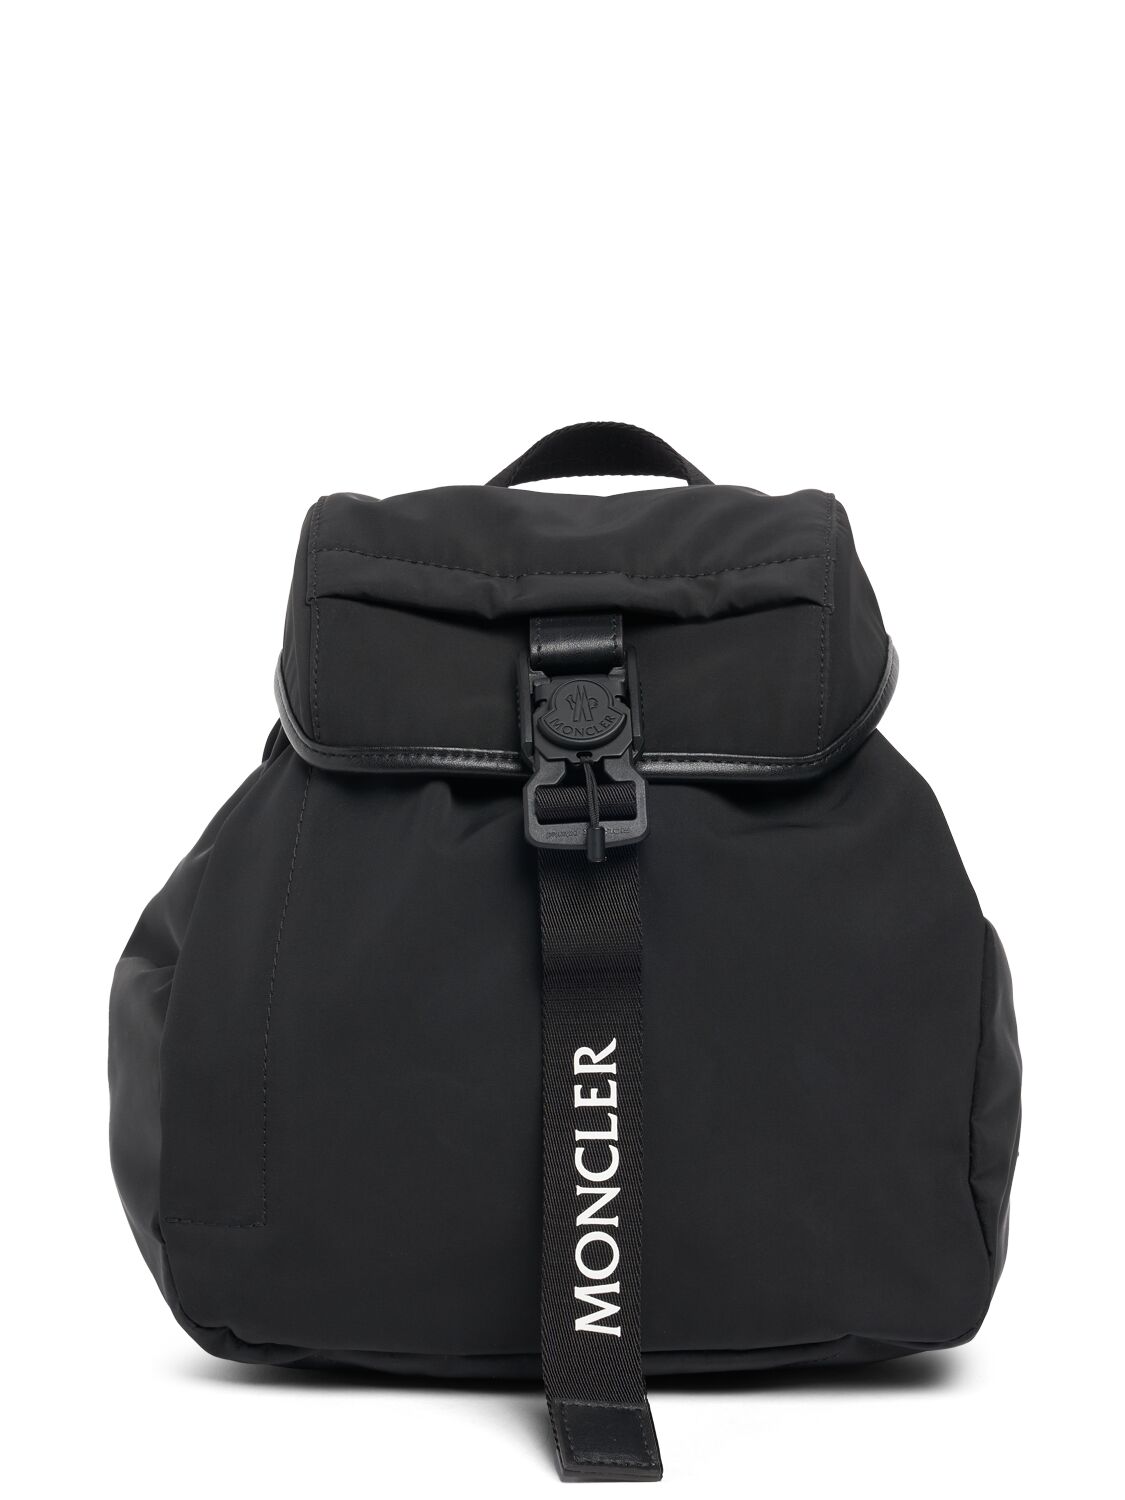 Image of Trick Tech Backpack